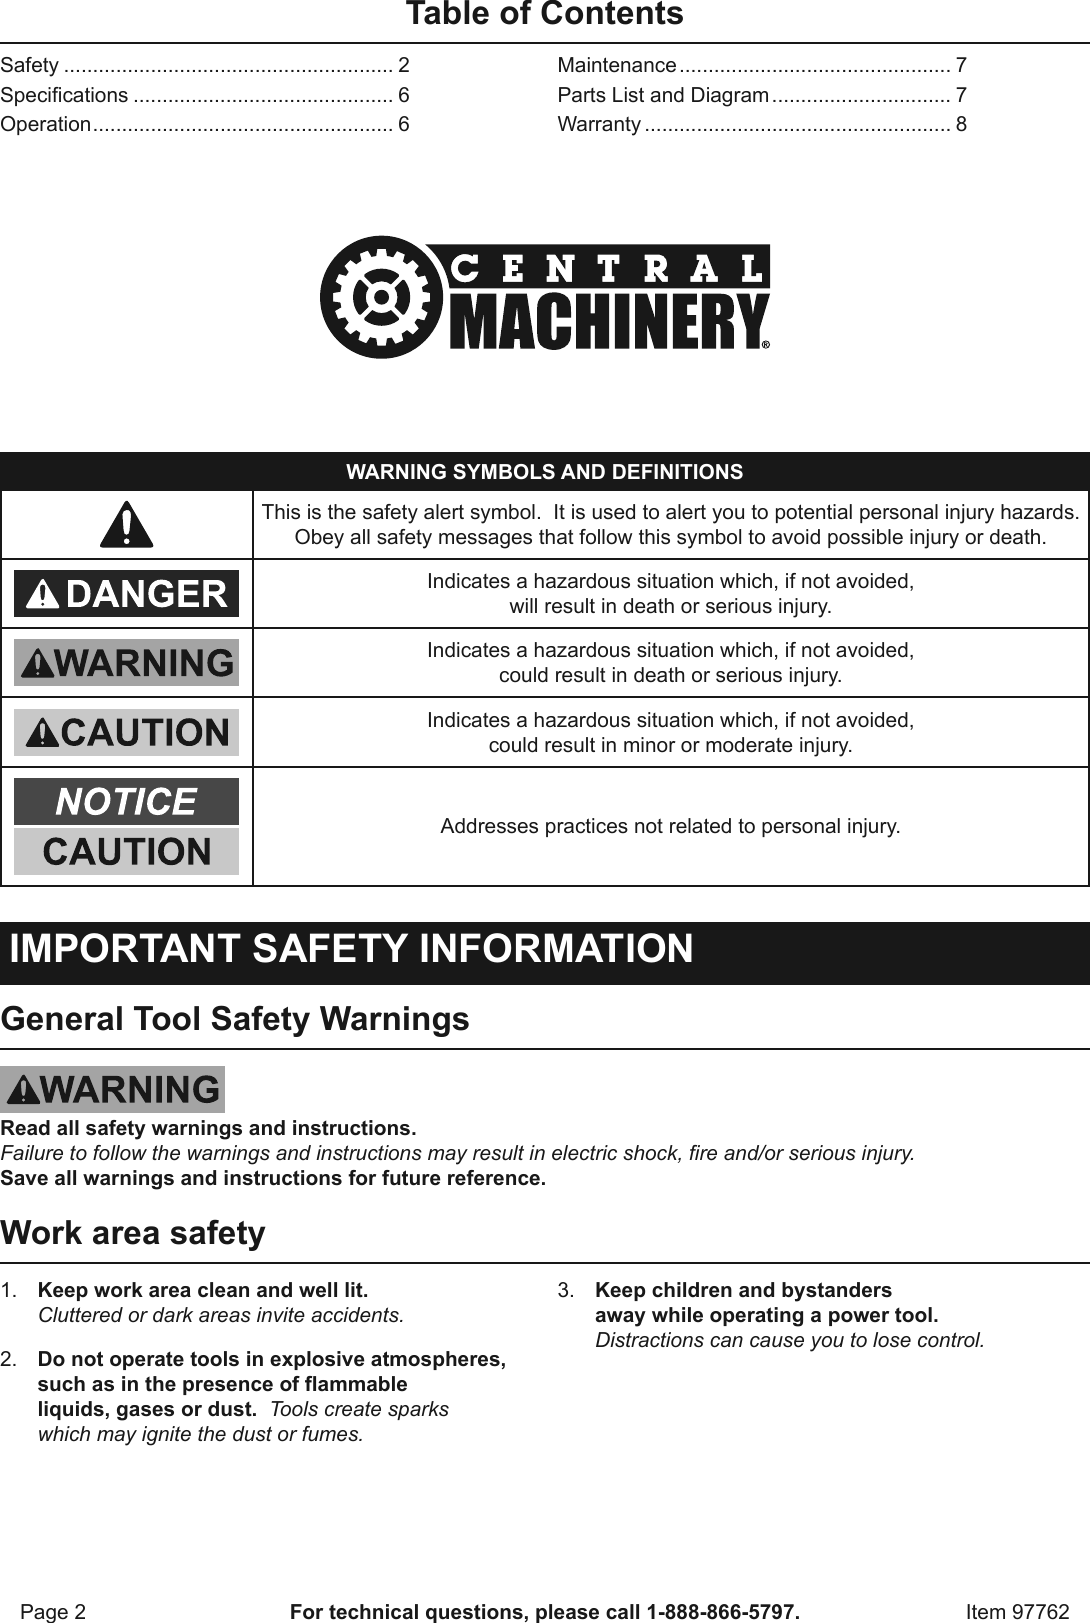 Page 2 of 8 - Harbor-Freight Harbor-Freight-8In-Portable-Ventilator-Product-Manual-  Harbor-freight-8in-portable-ventilator-product-manual